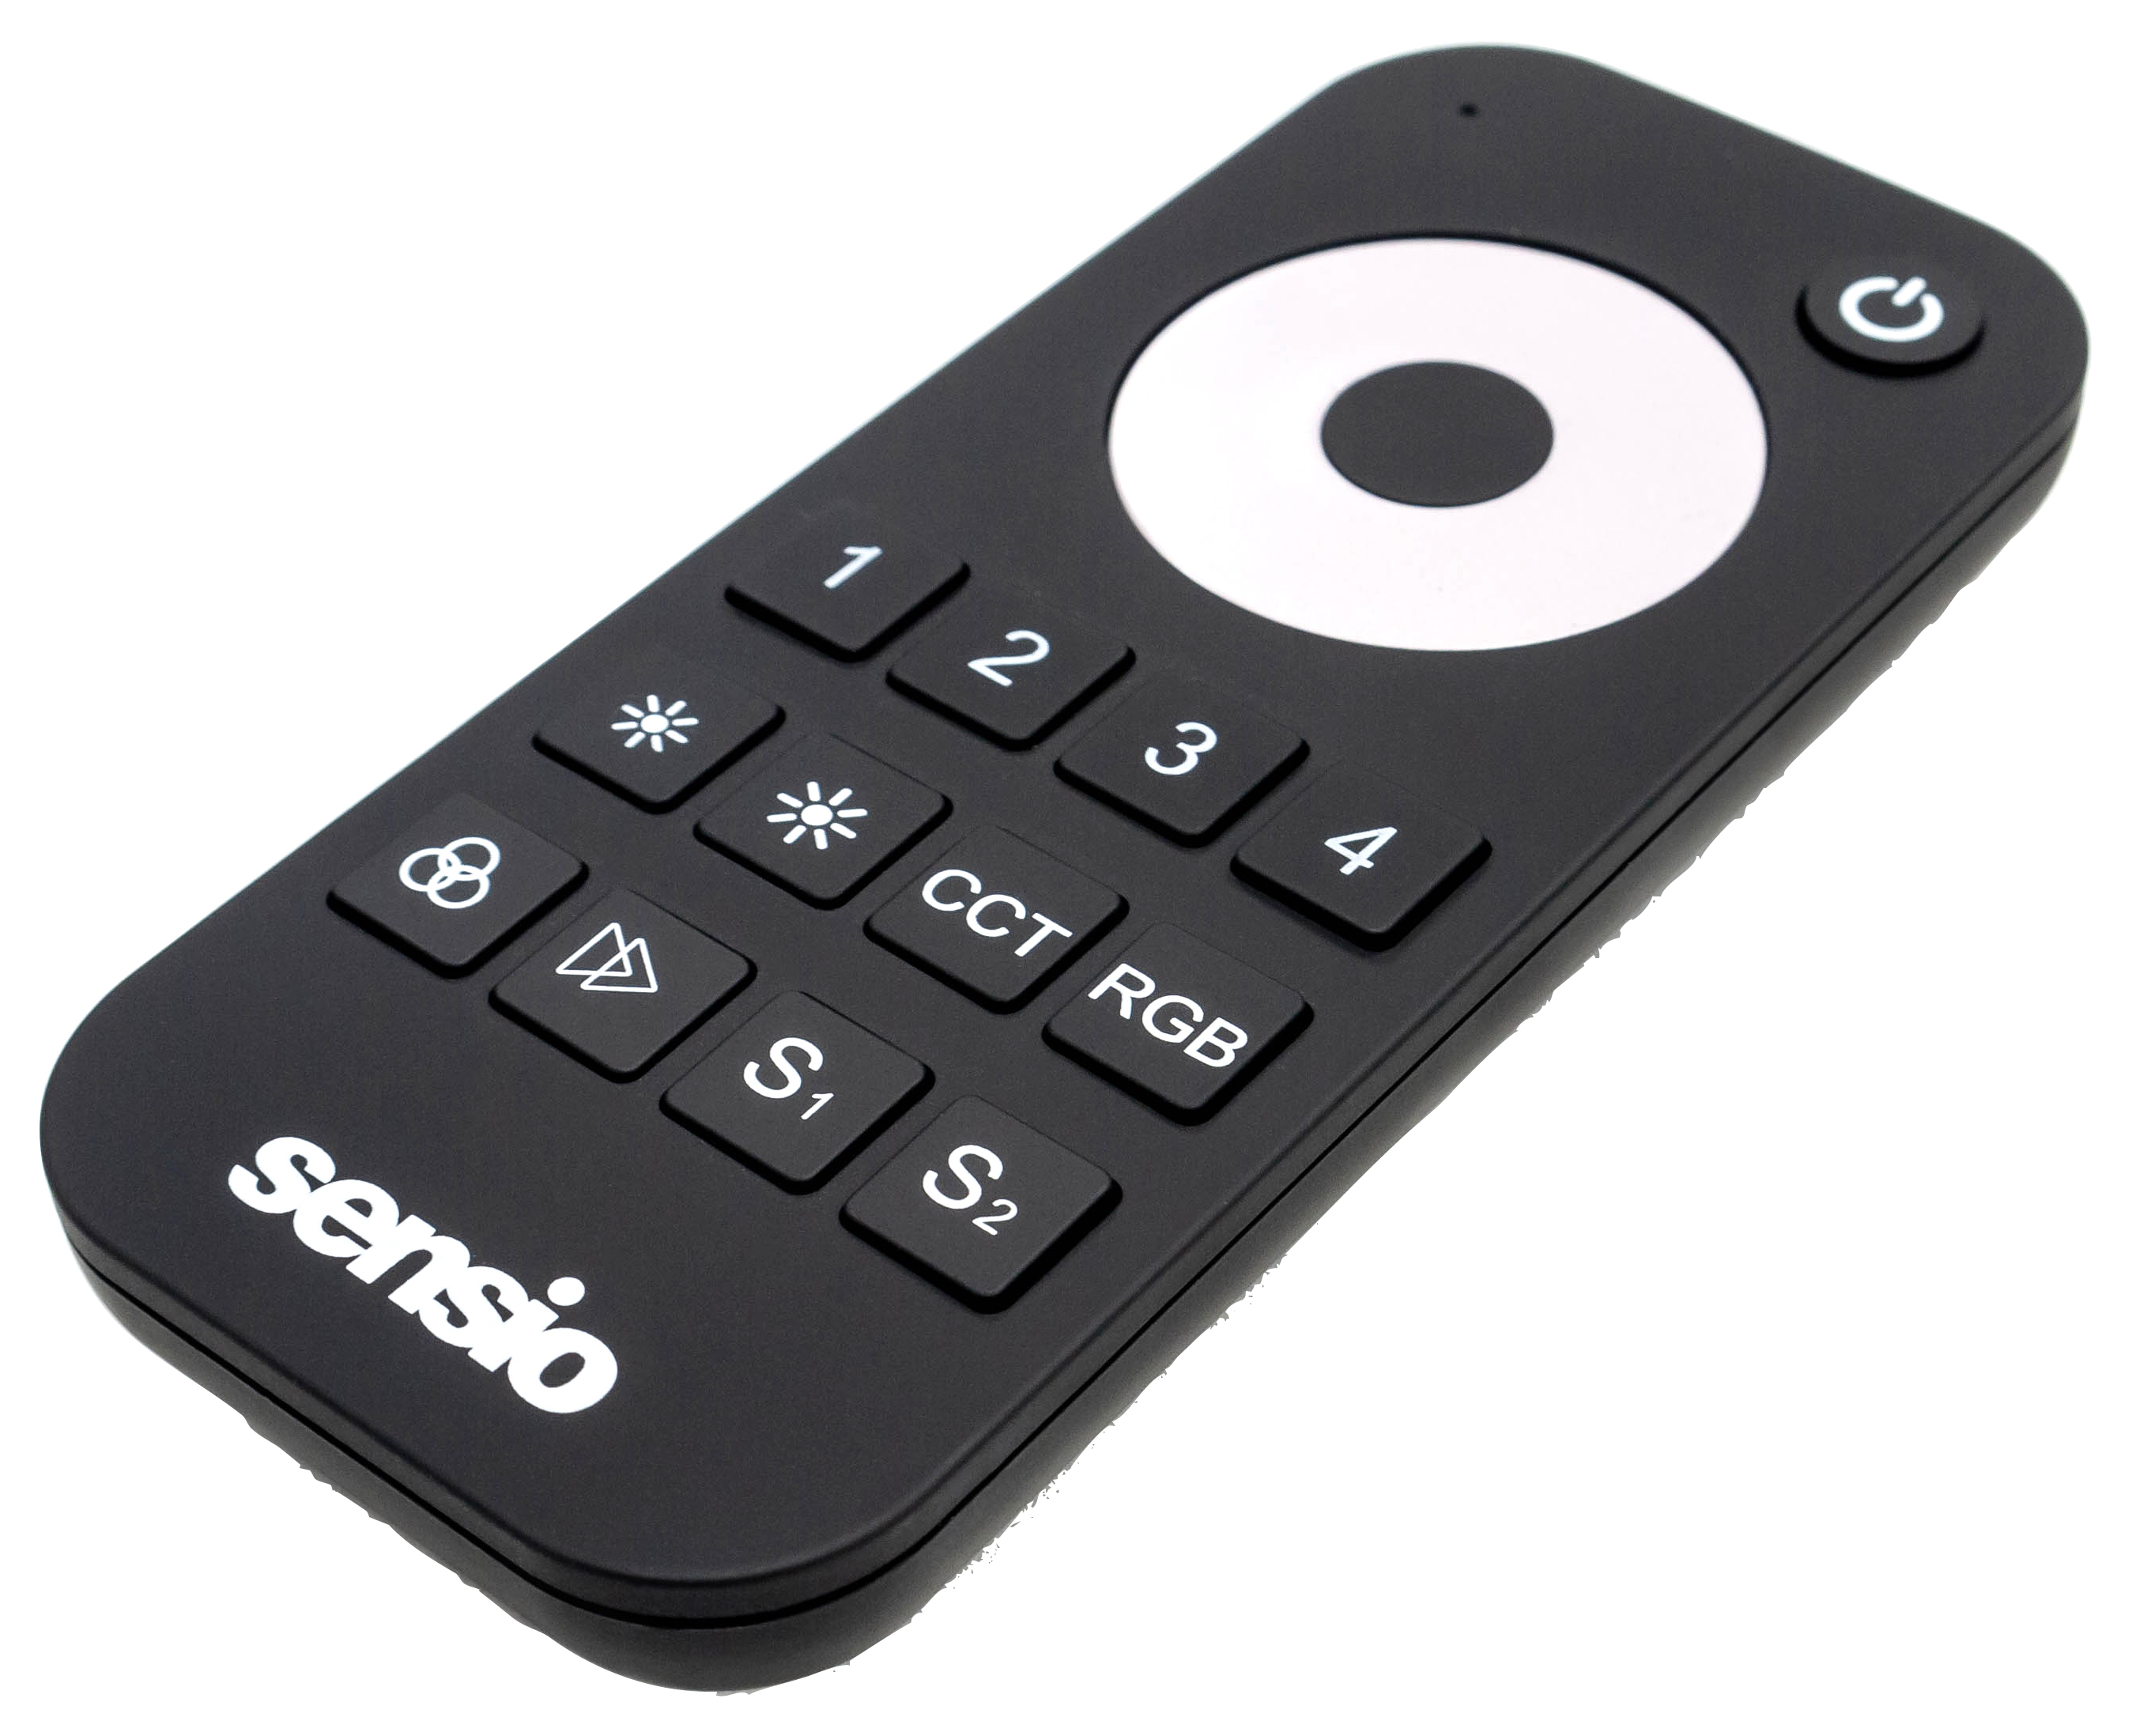 Image of Sensio Universal Remote Control for LED Lighting